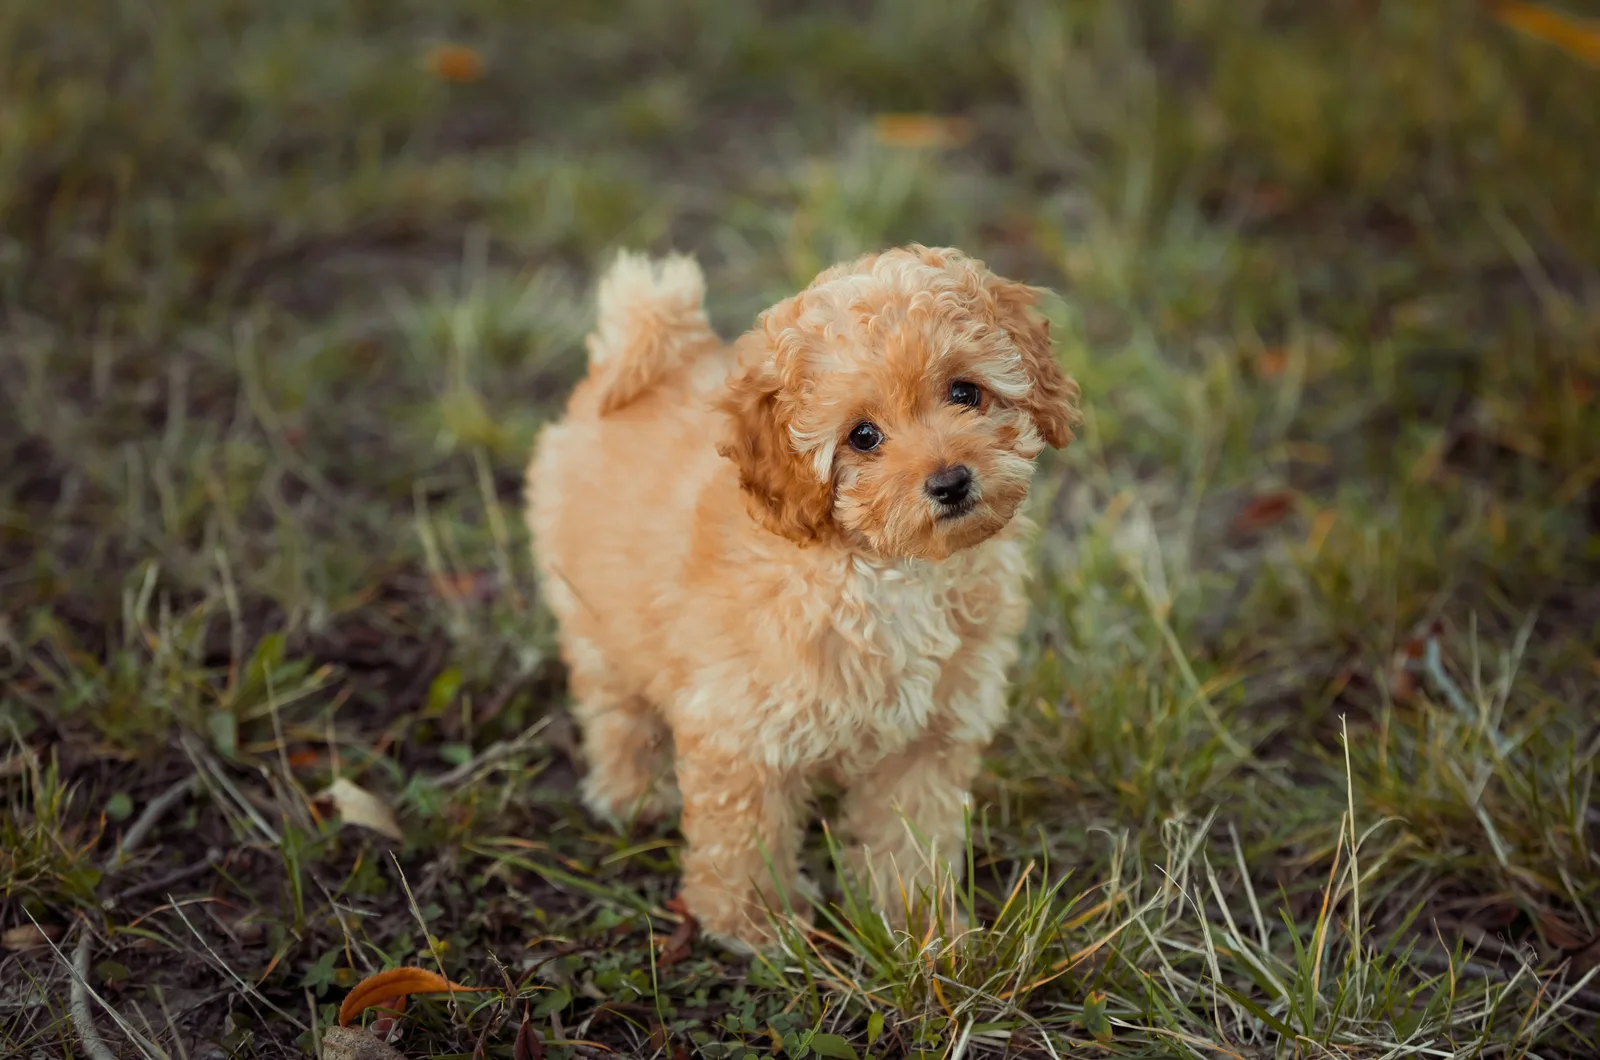 Miniature poodle standing on grass looking up